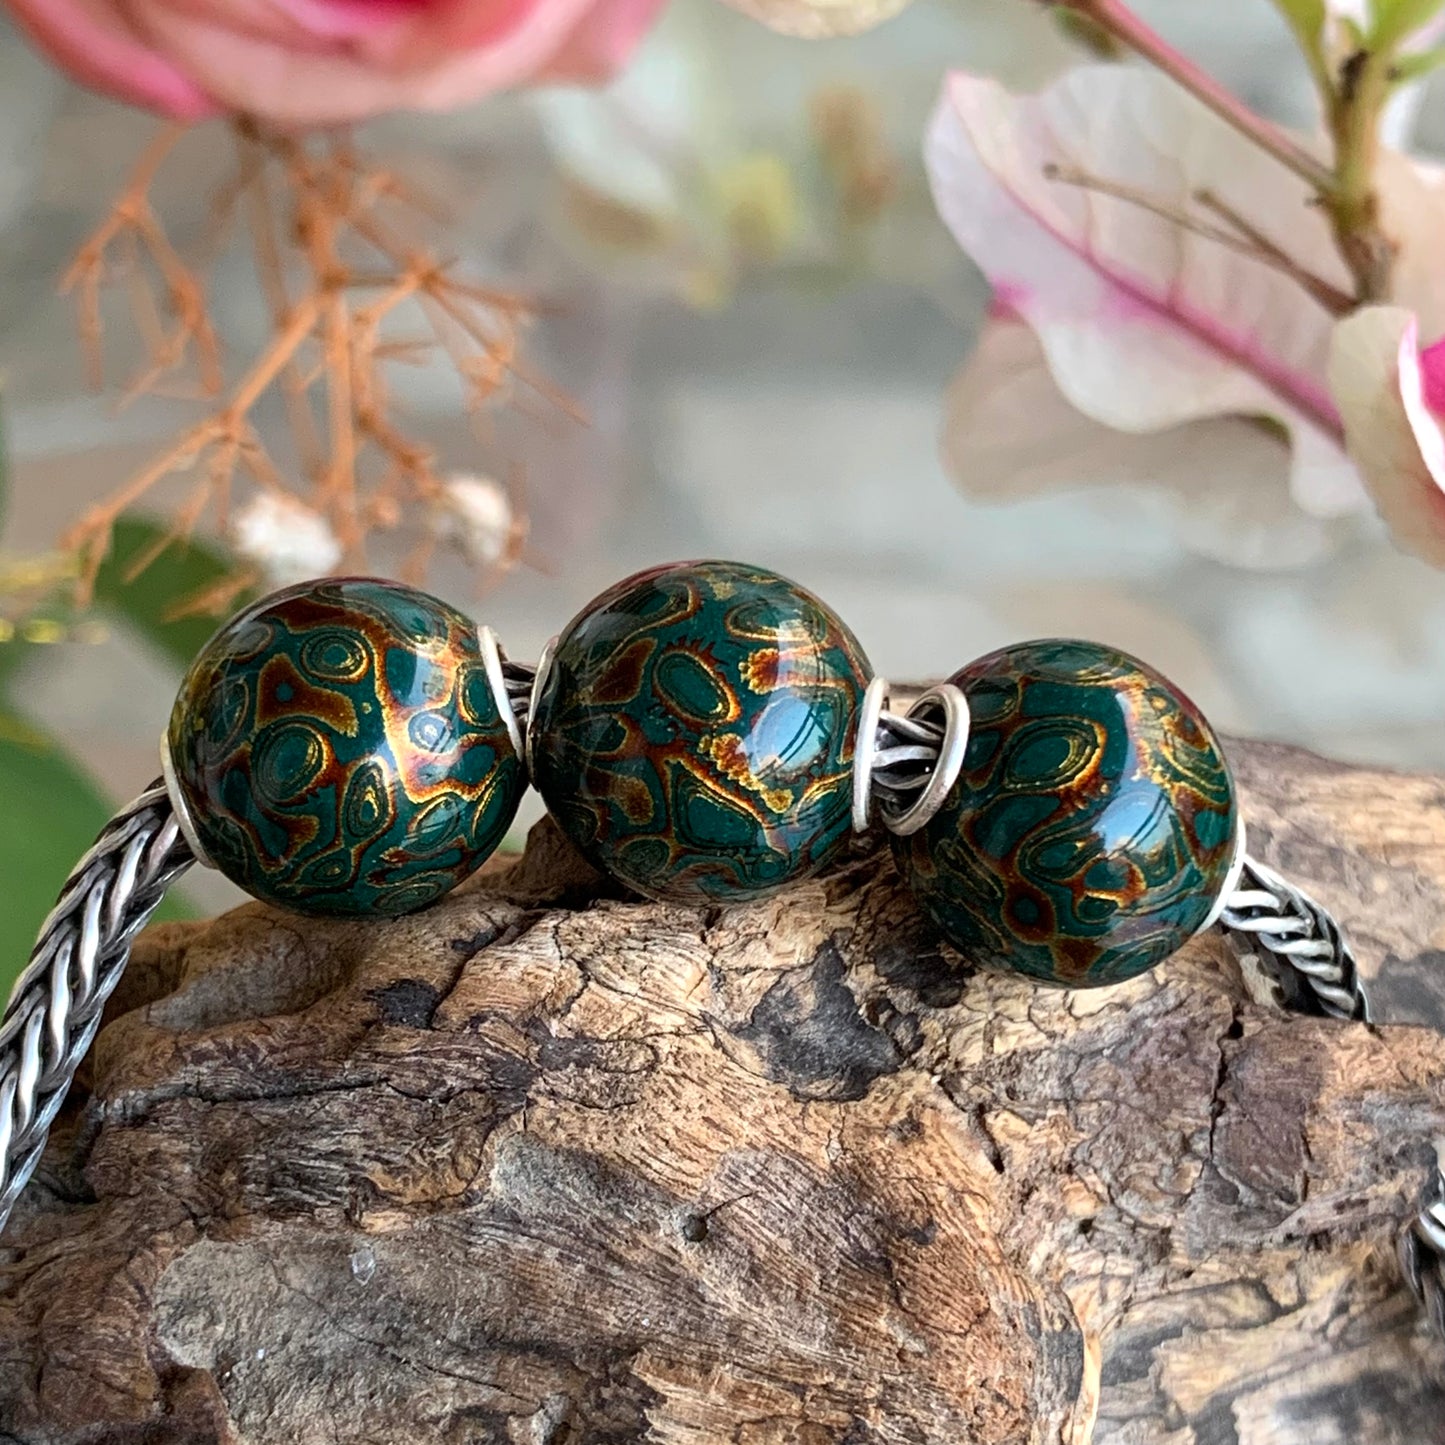 Dark Peacock Green Natural Resin Painted Handmade Wooden Beads Wood Beads with Silver Core for Bracelets